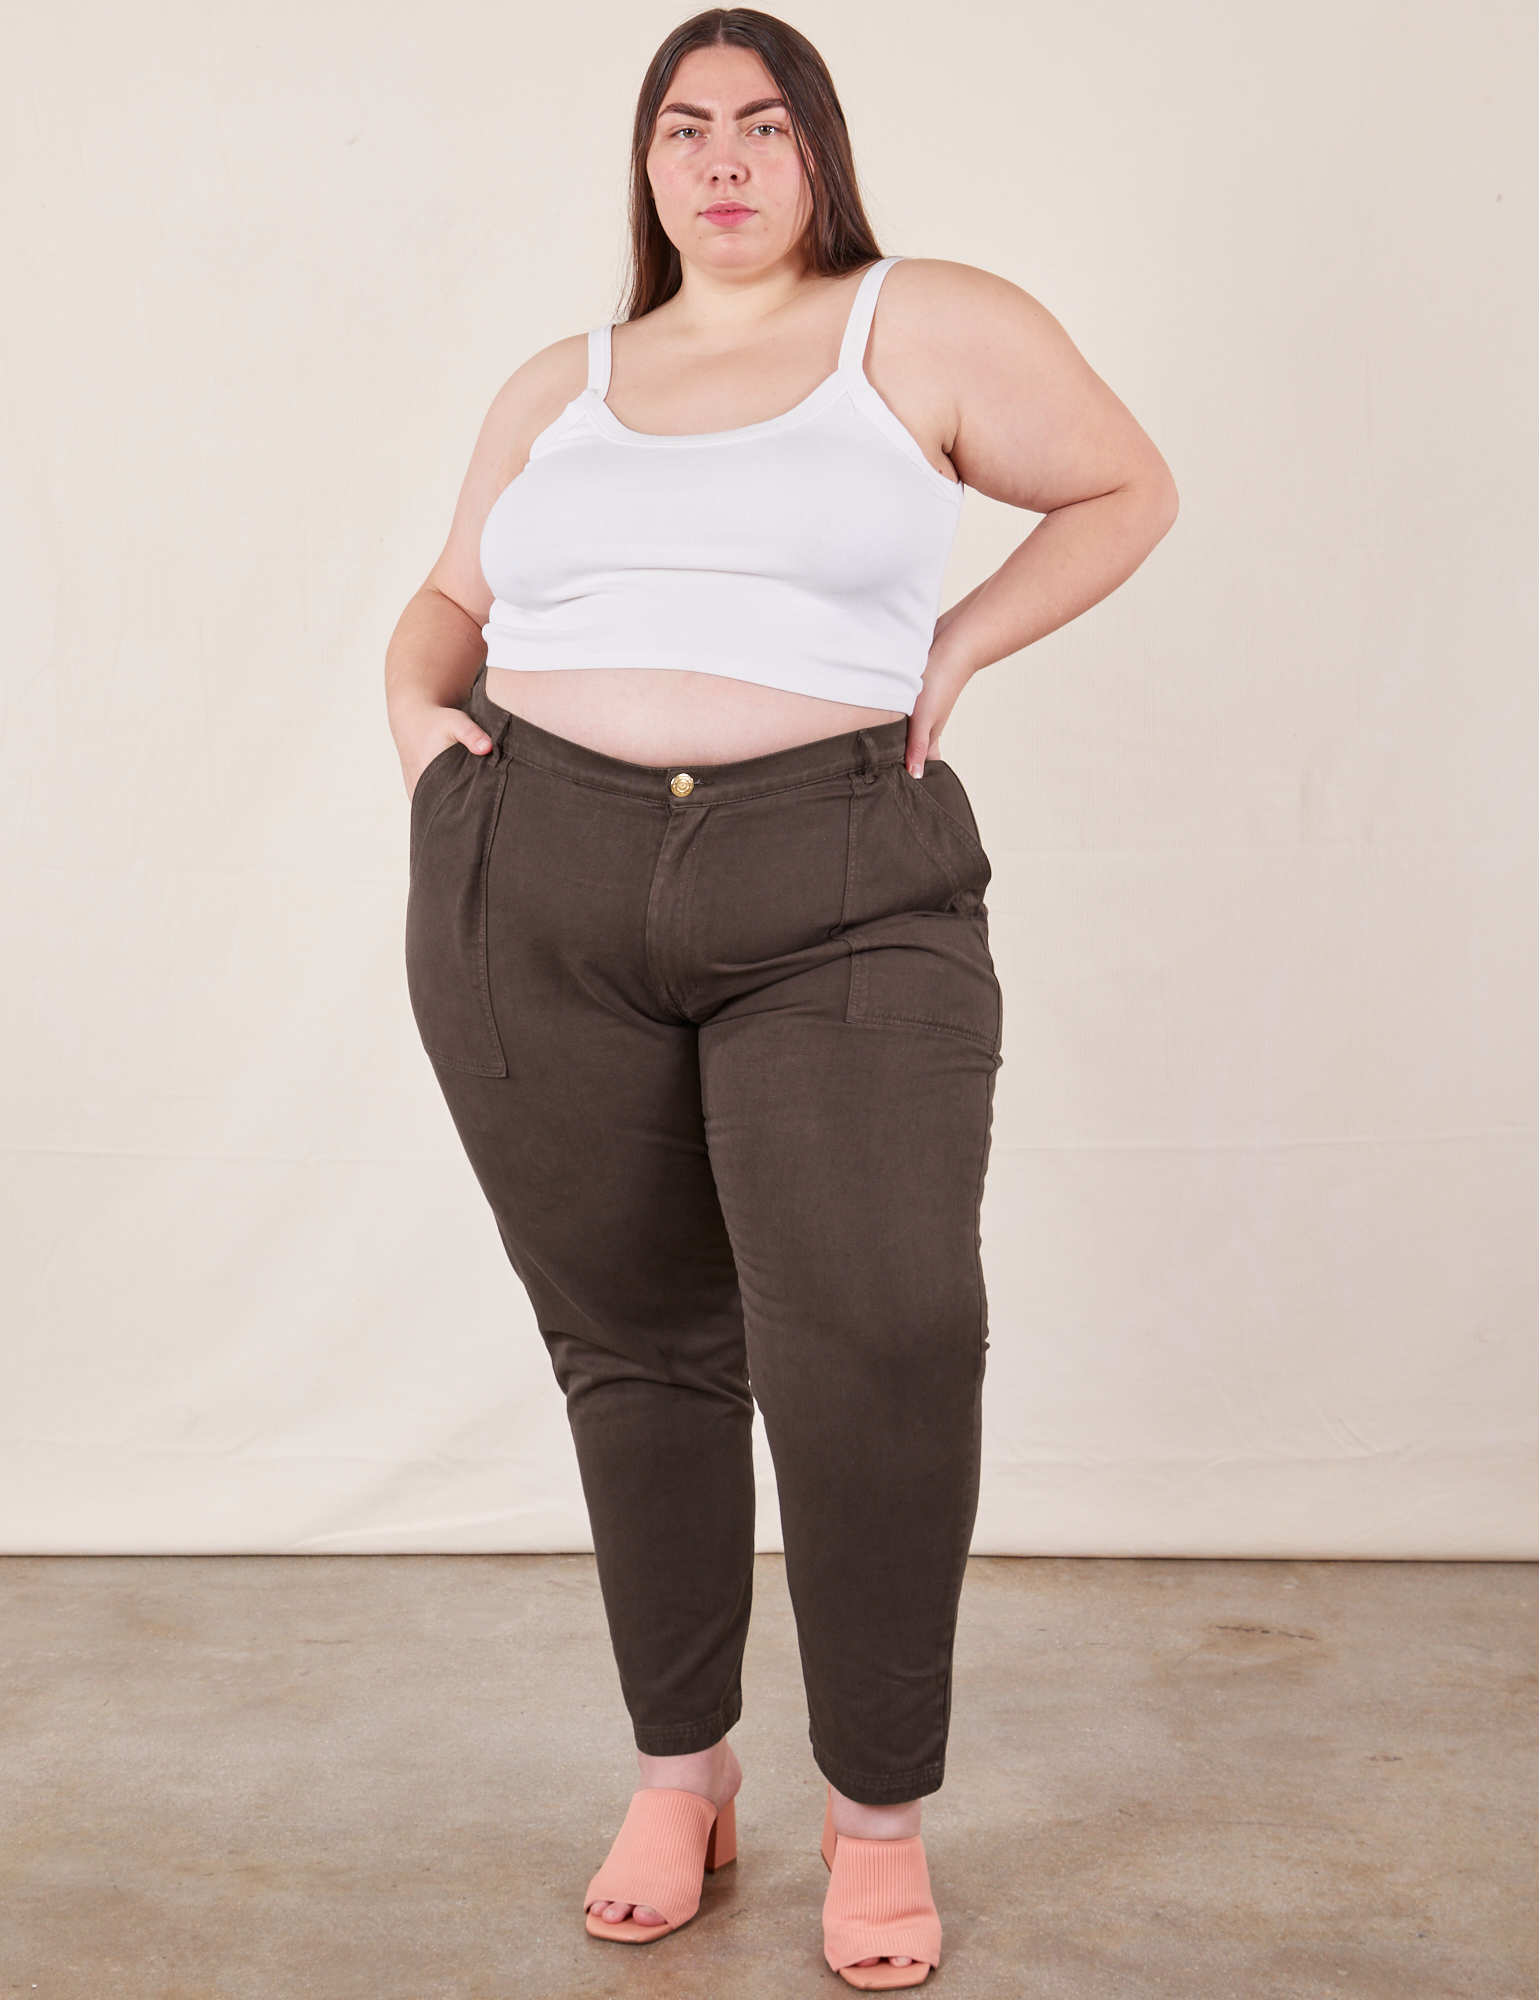 Marielena is 5&#39;8&quot; and wearing 2XL Pencil Pants in Espresso Brown Cropped Cami in vintage tee off-white